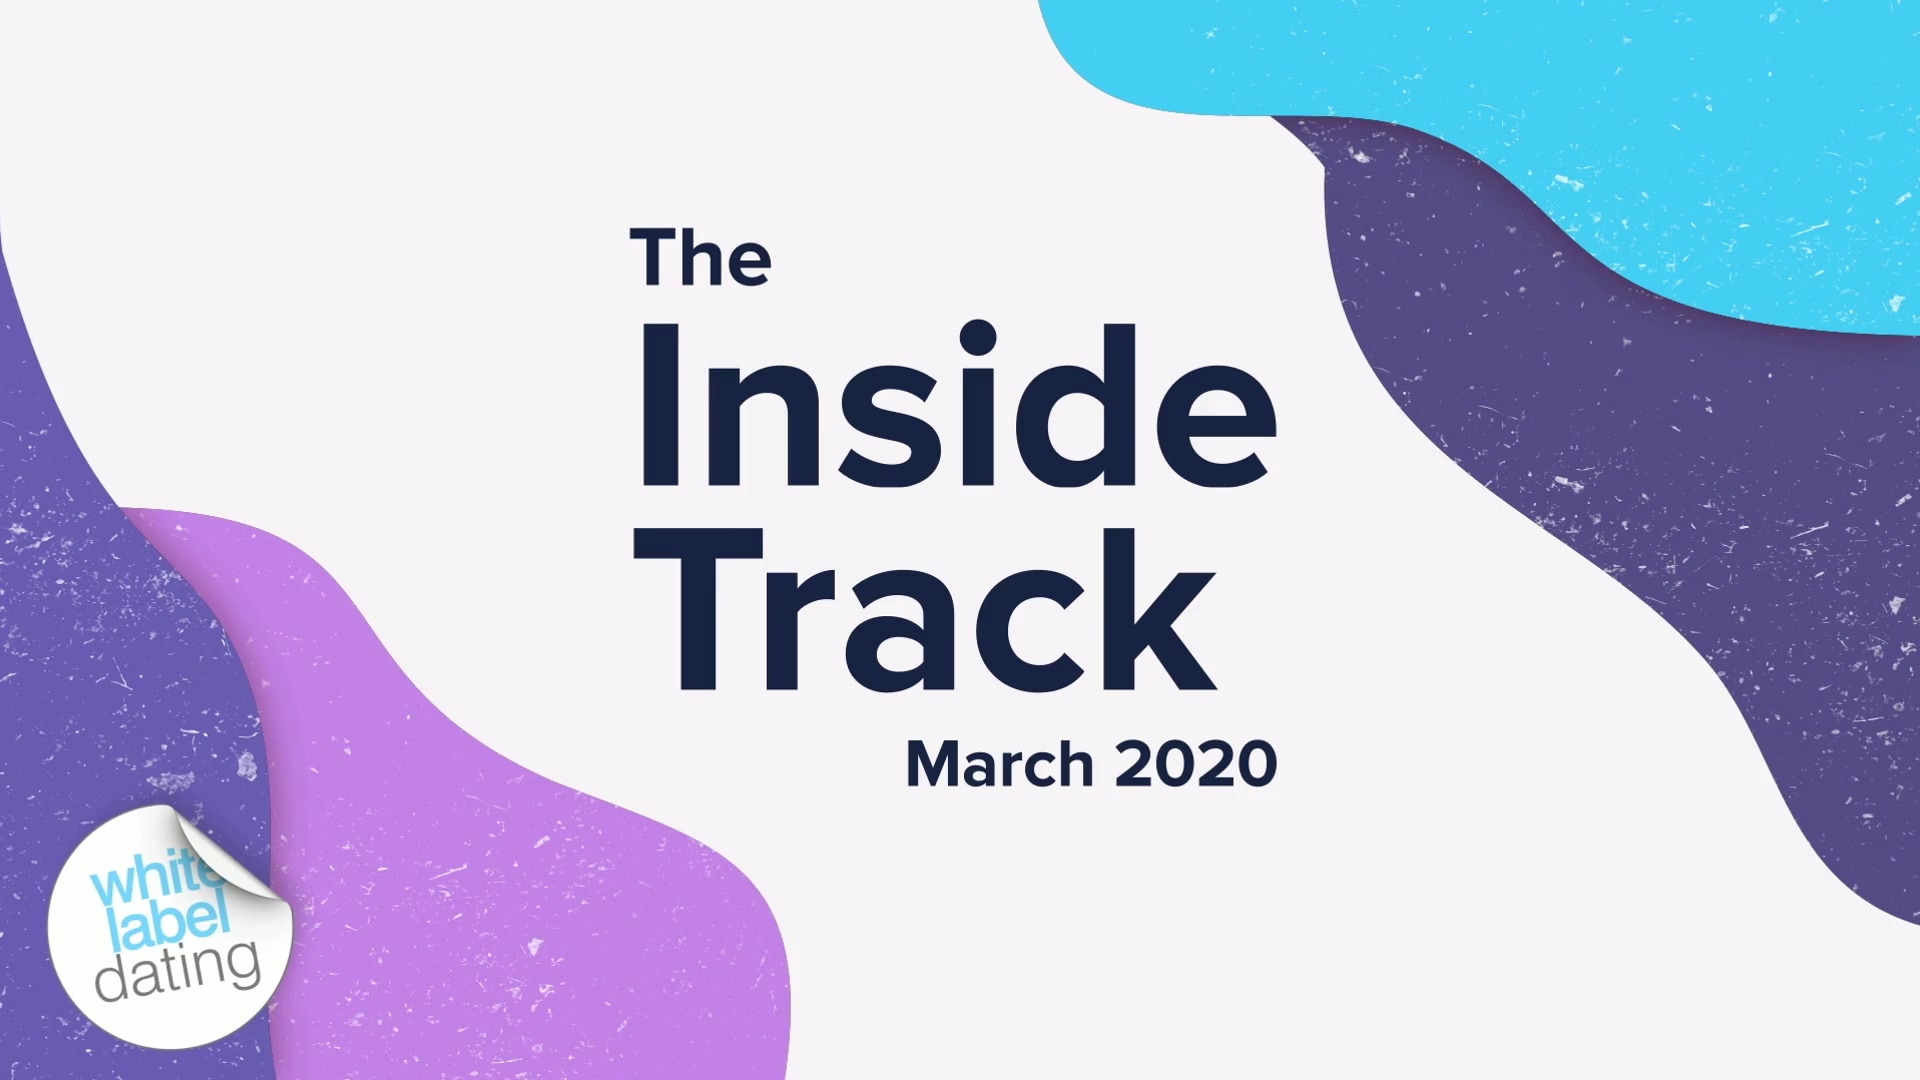 The Inside Track - March 2020 (confirmed)